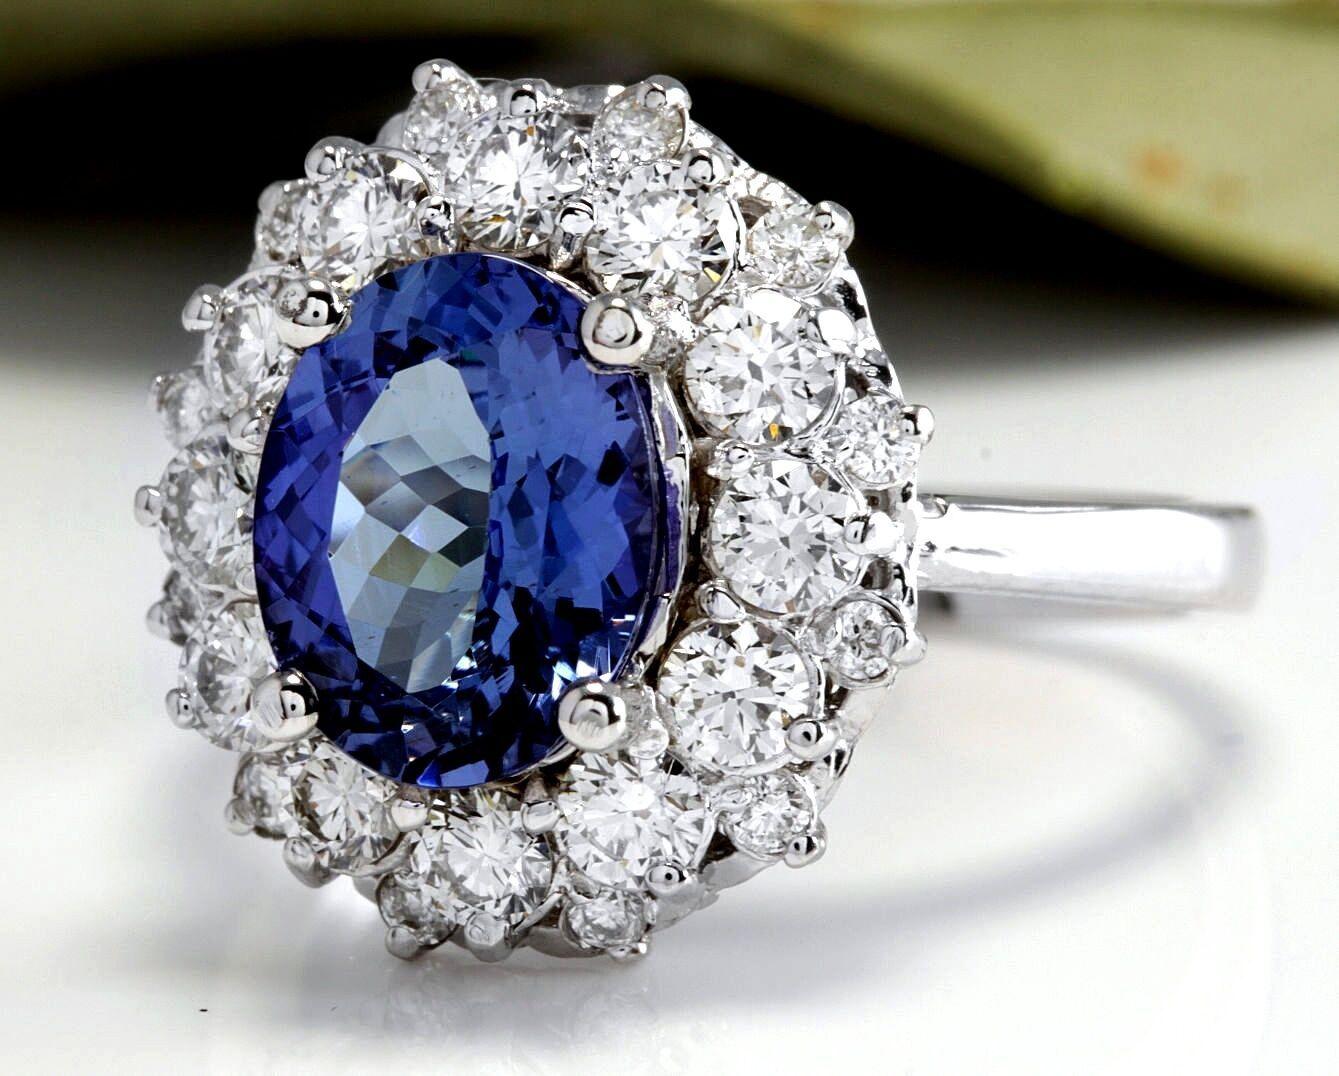 4.75 Carats Natural Very Nice Looking Tanzanite and Diamond 14K Solid White Gold Ring

Total Natural Oval Cut Tanzanite Weight is: 3.50 Carats

Tanzanite Measures: 9.00 x 7.00mm

Natural Round Diamonds Weight: 1.25 Carats (color G-H / Clarity